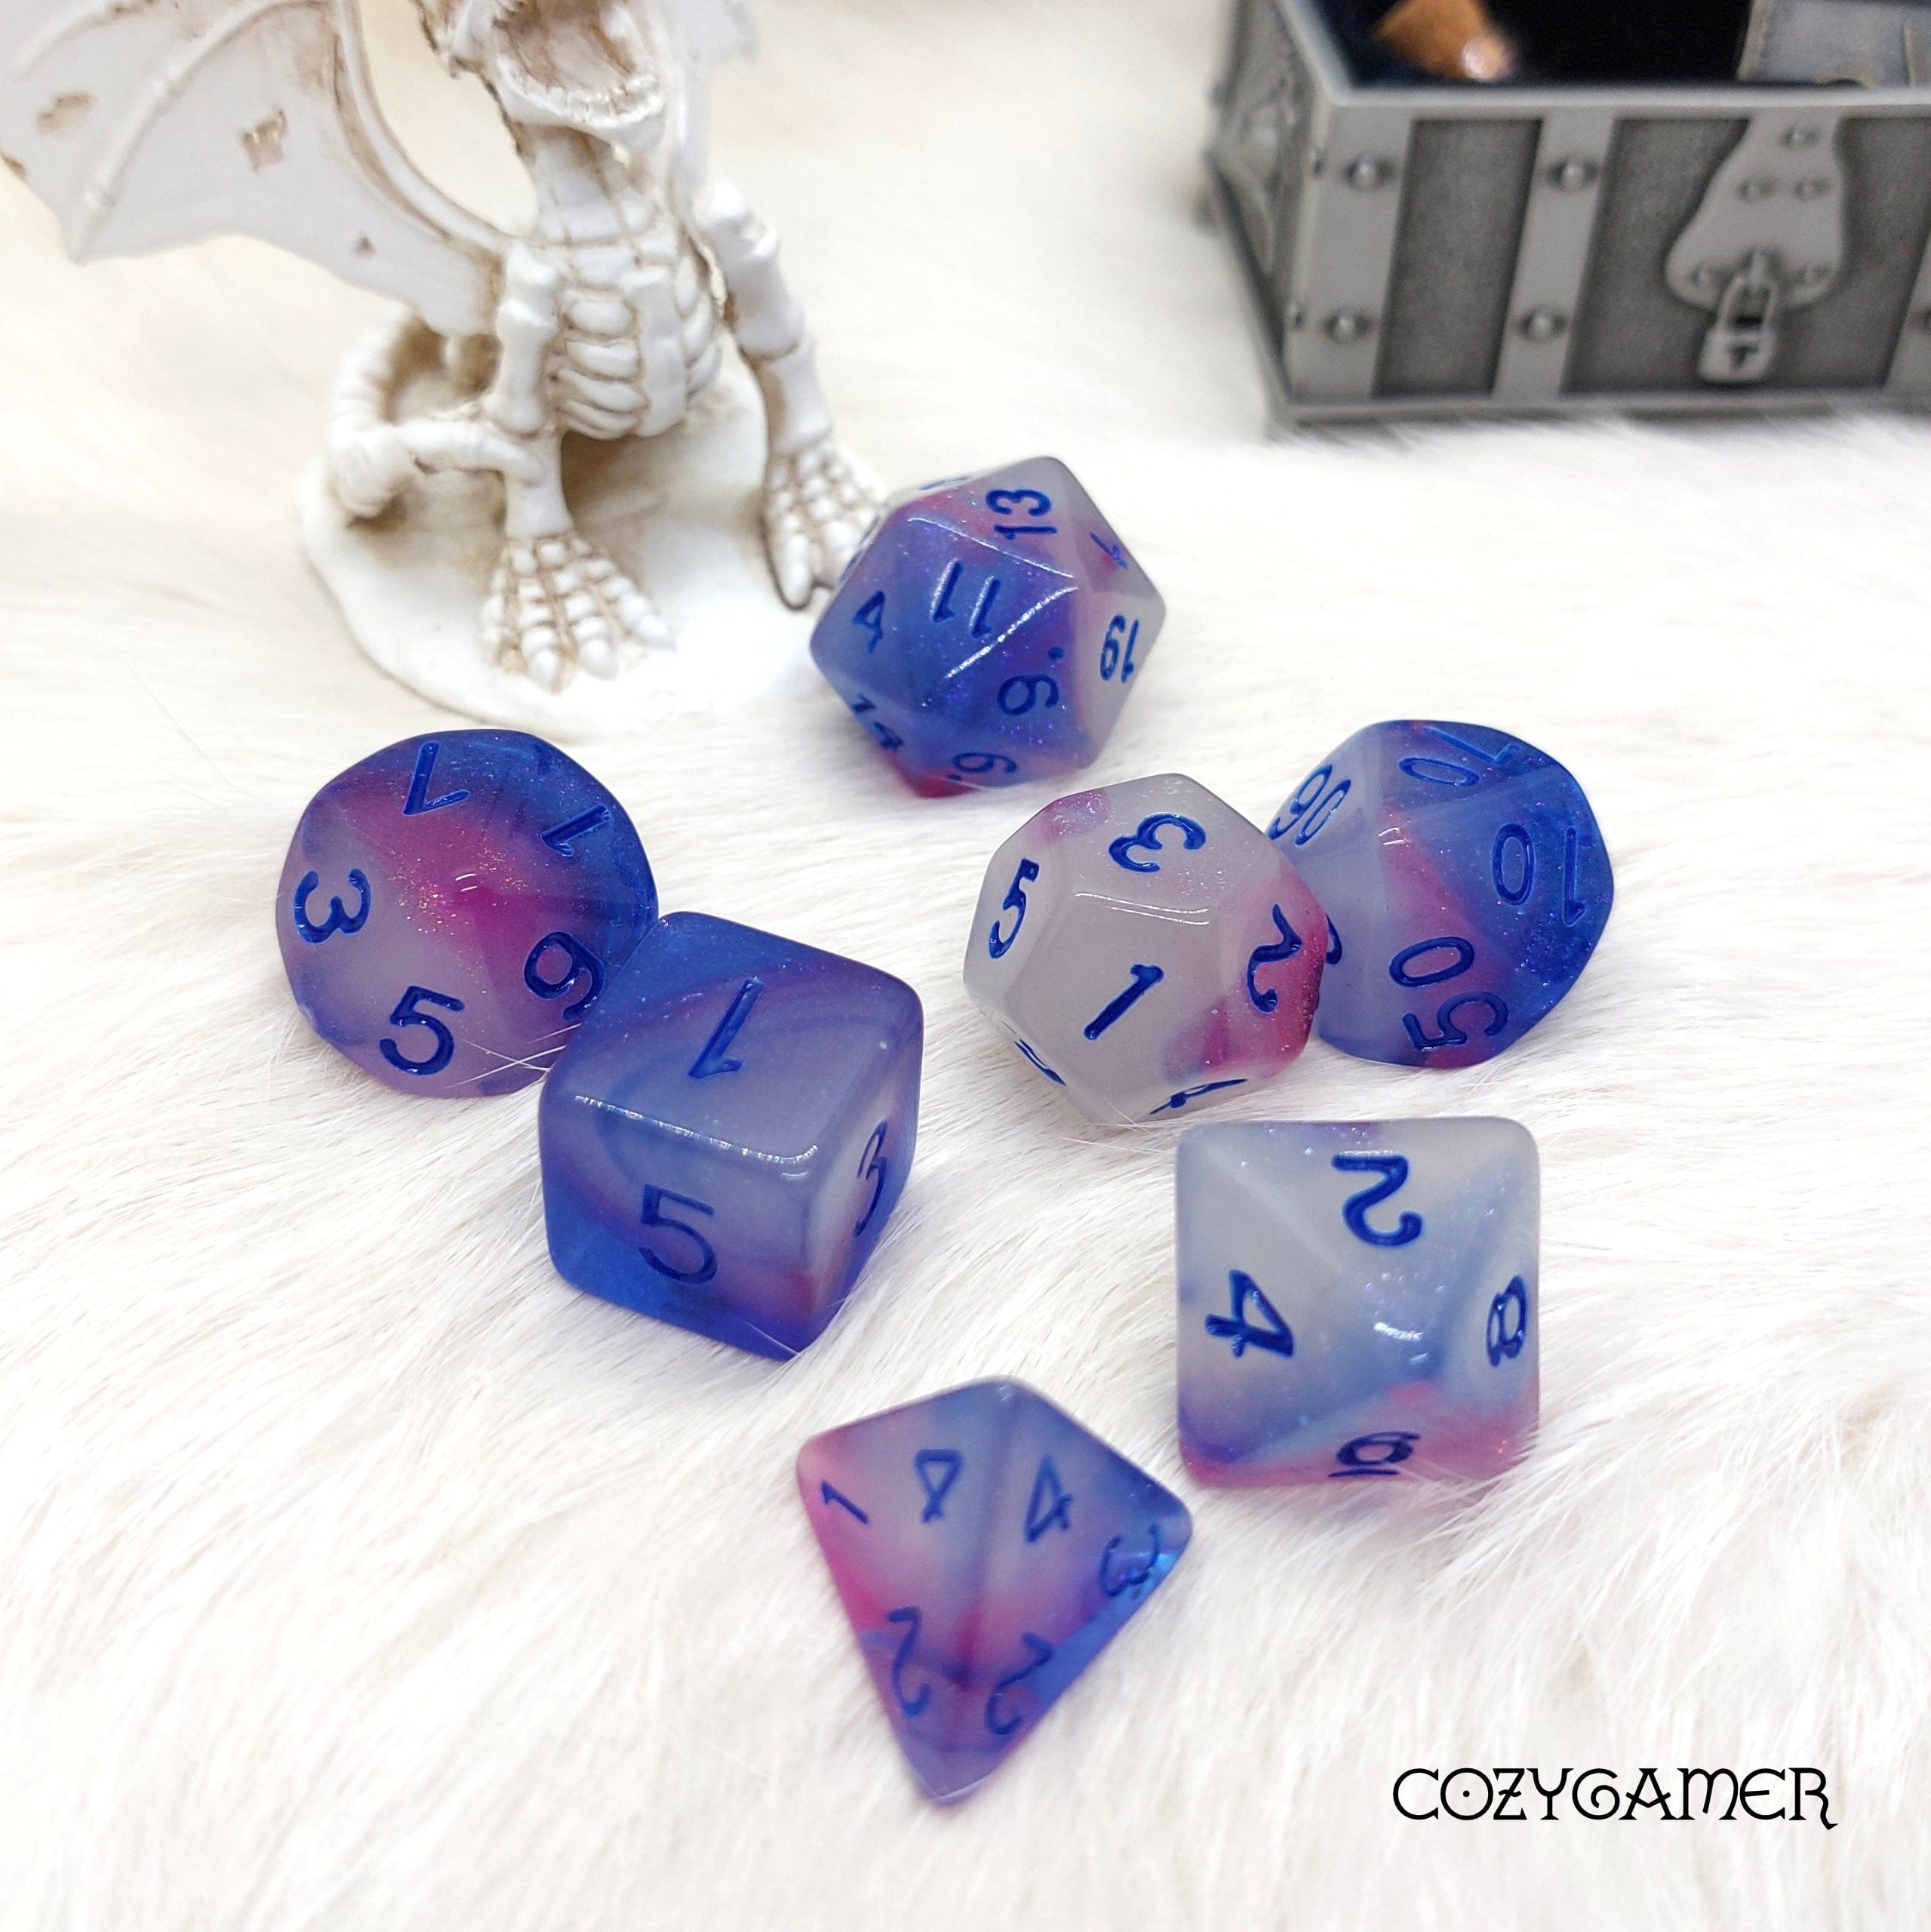 Coolest DD Dice Sets  Where To Buy Them